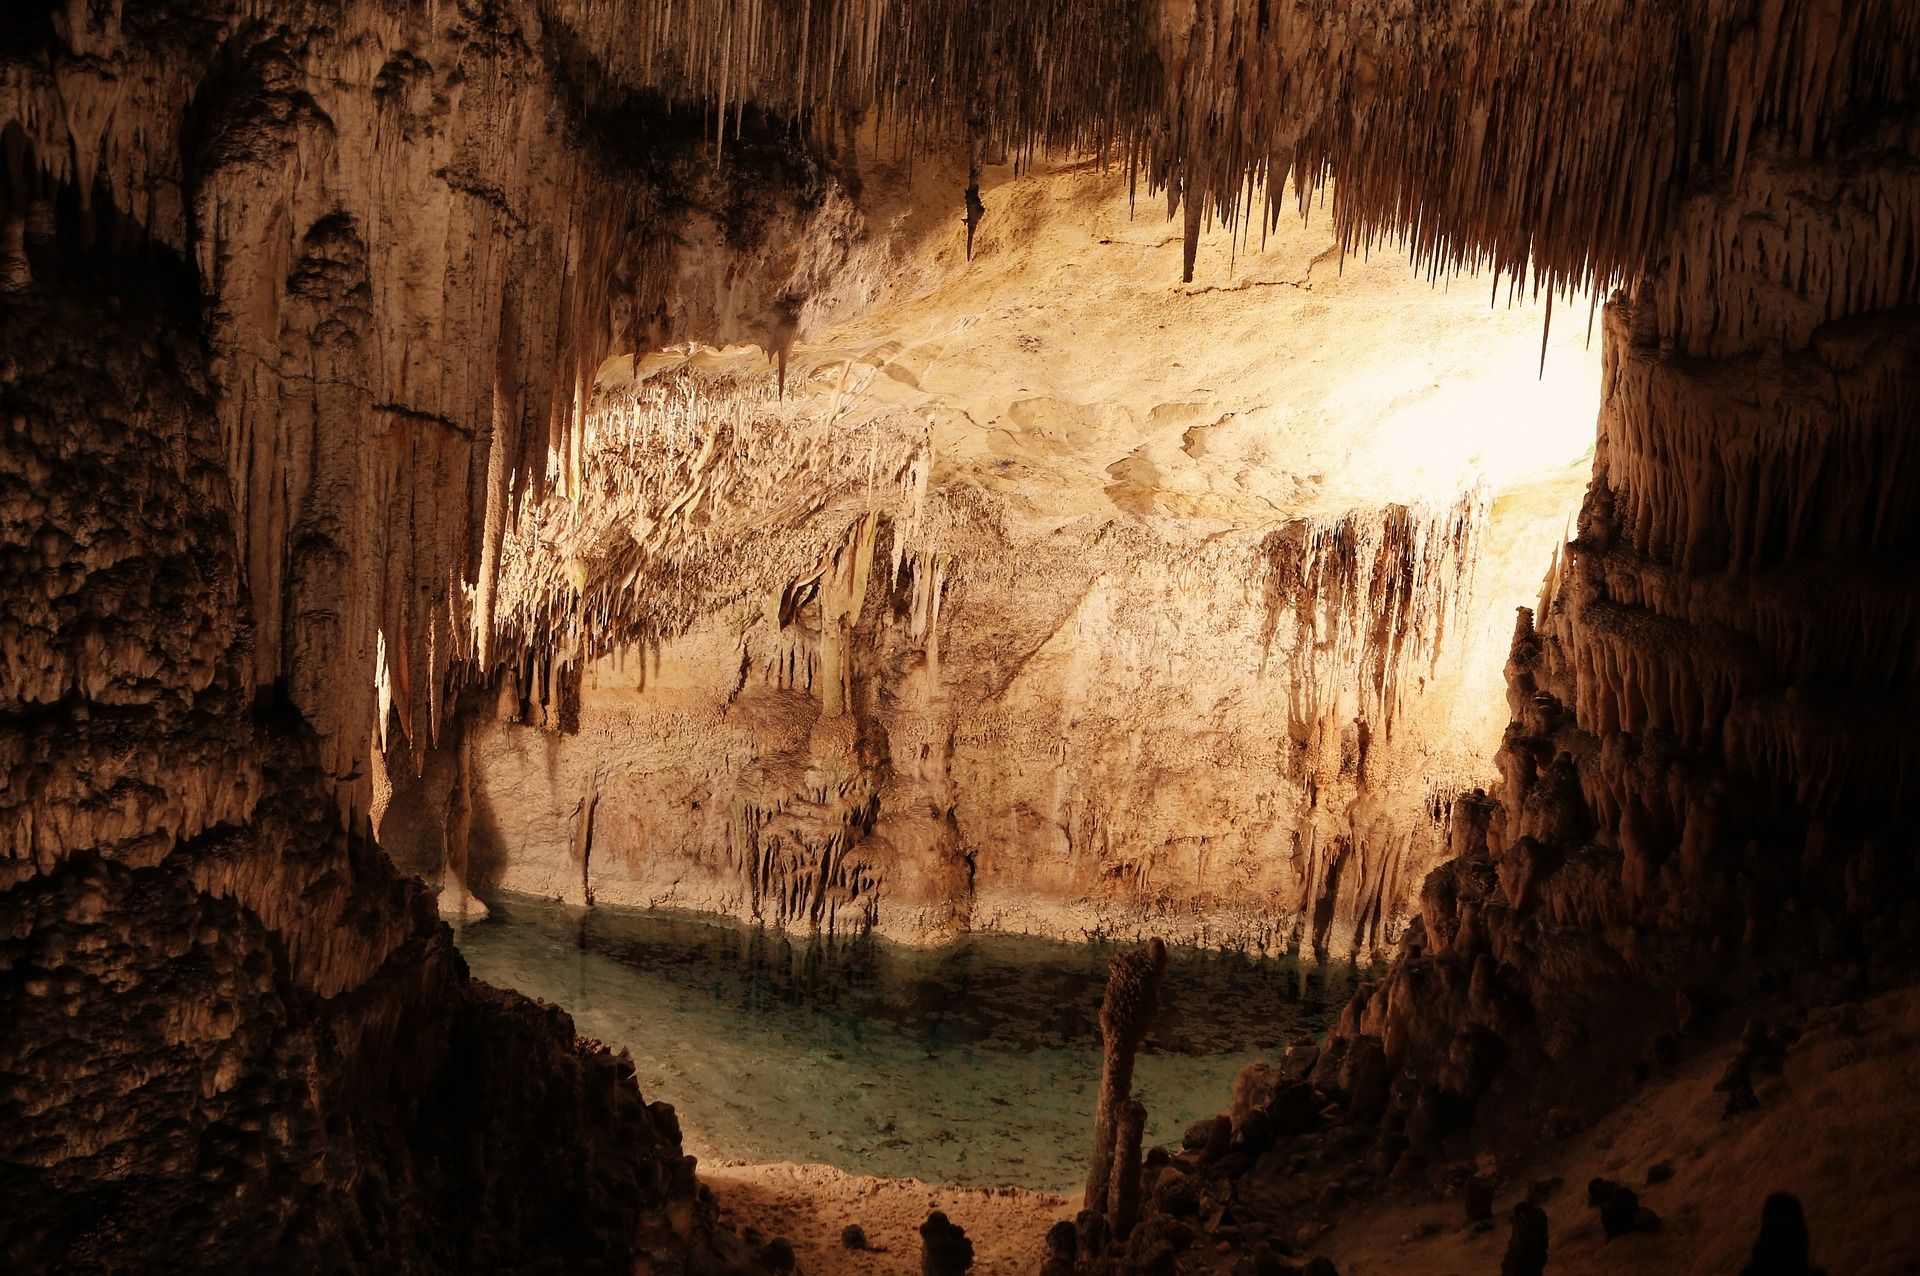 body of water and stalactites in a cavern